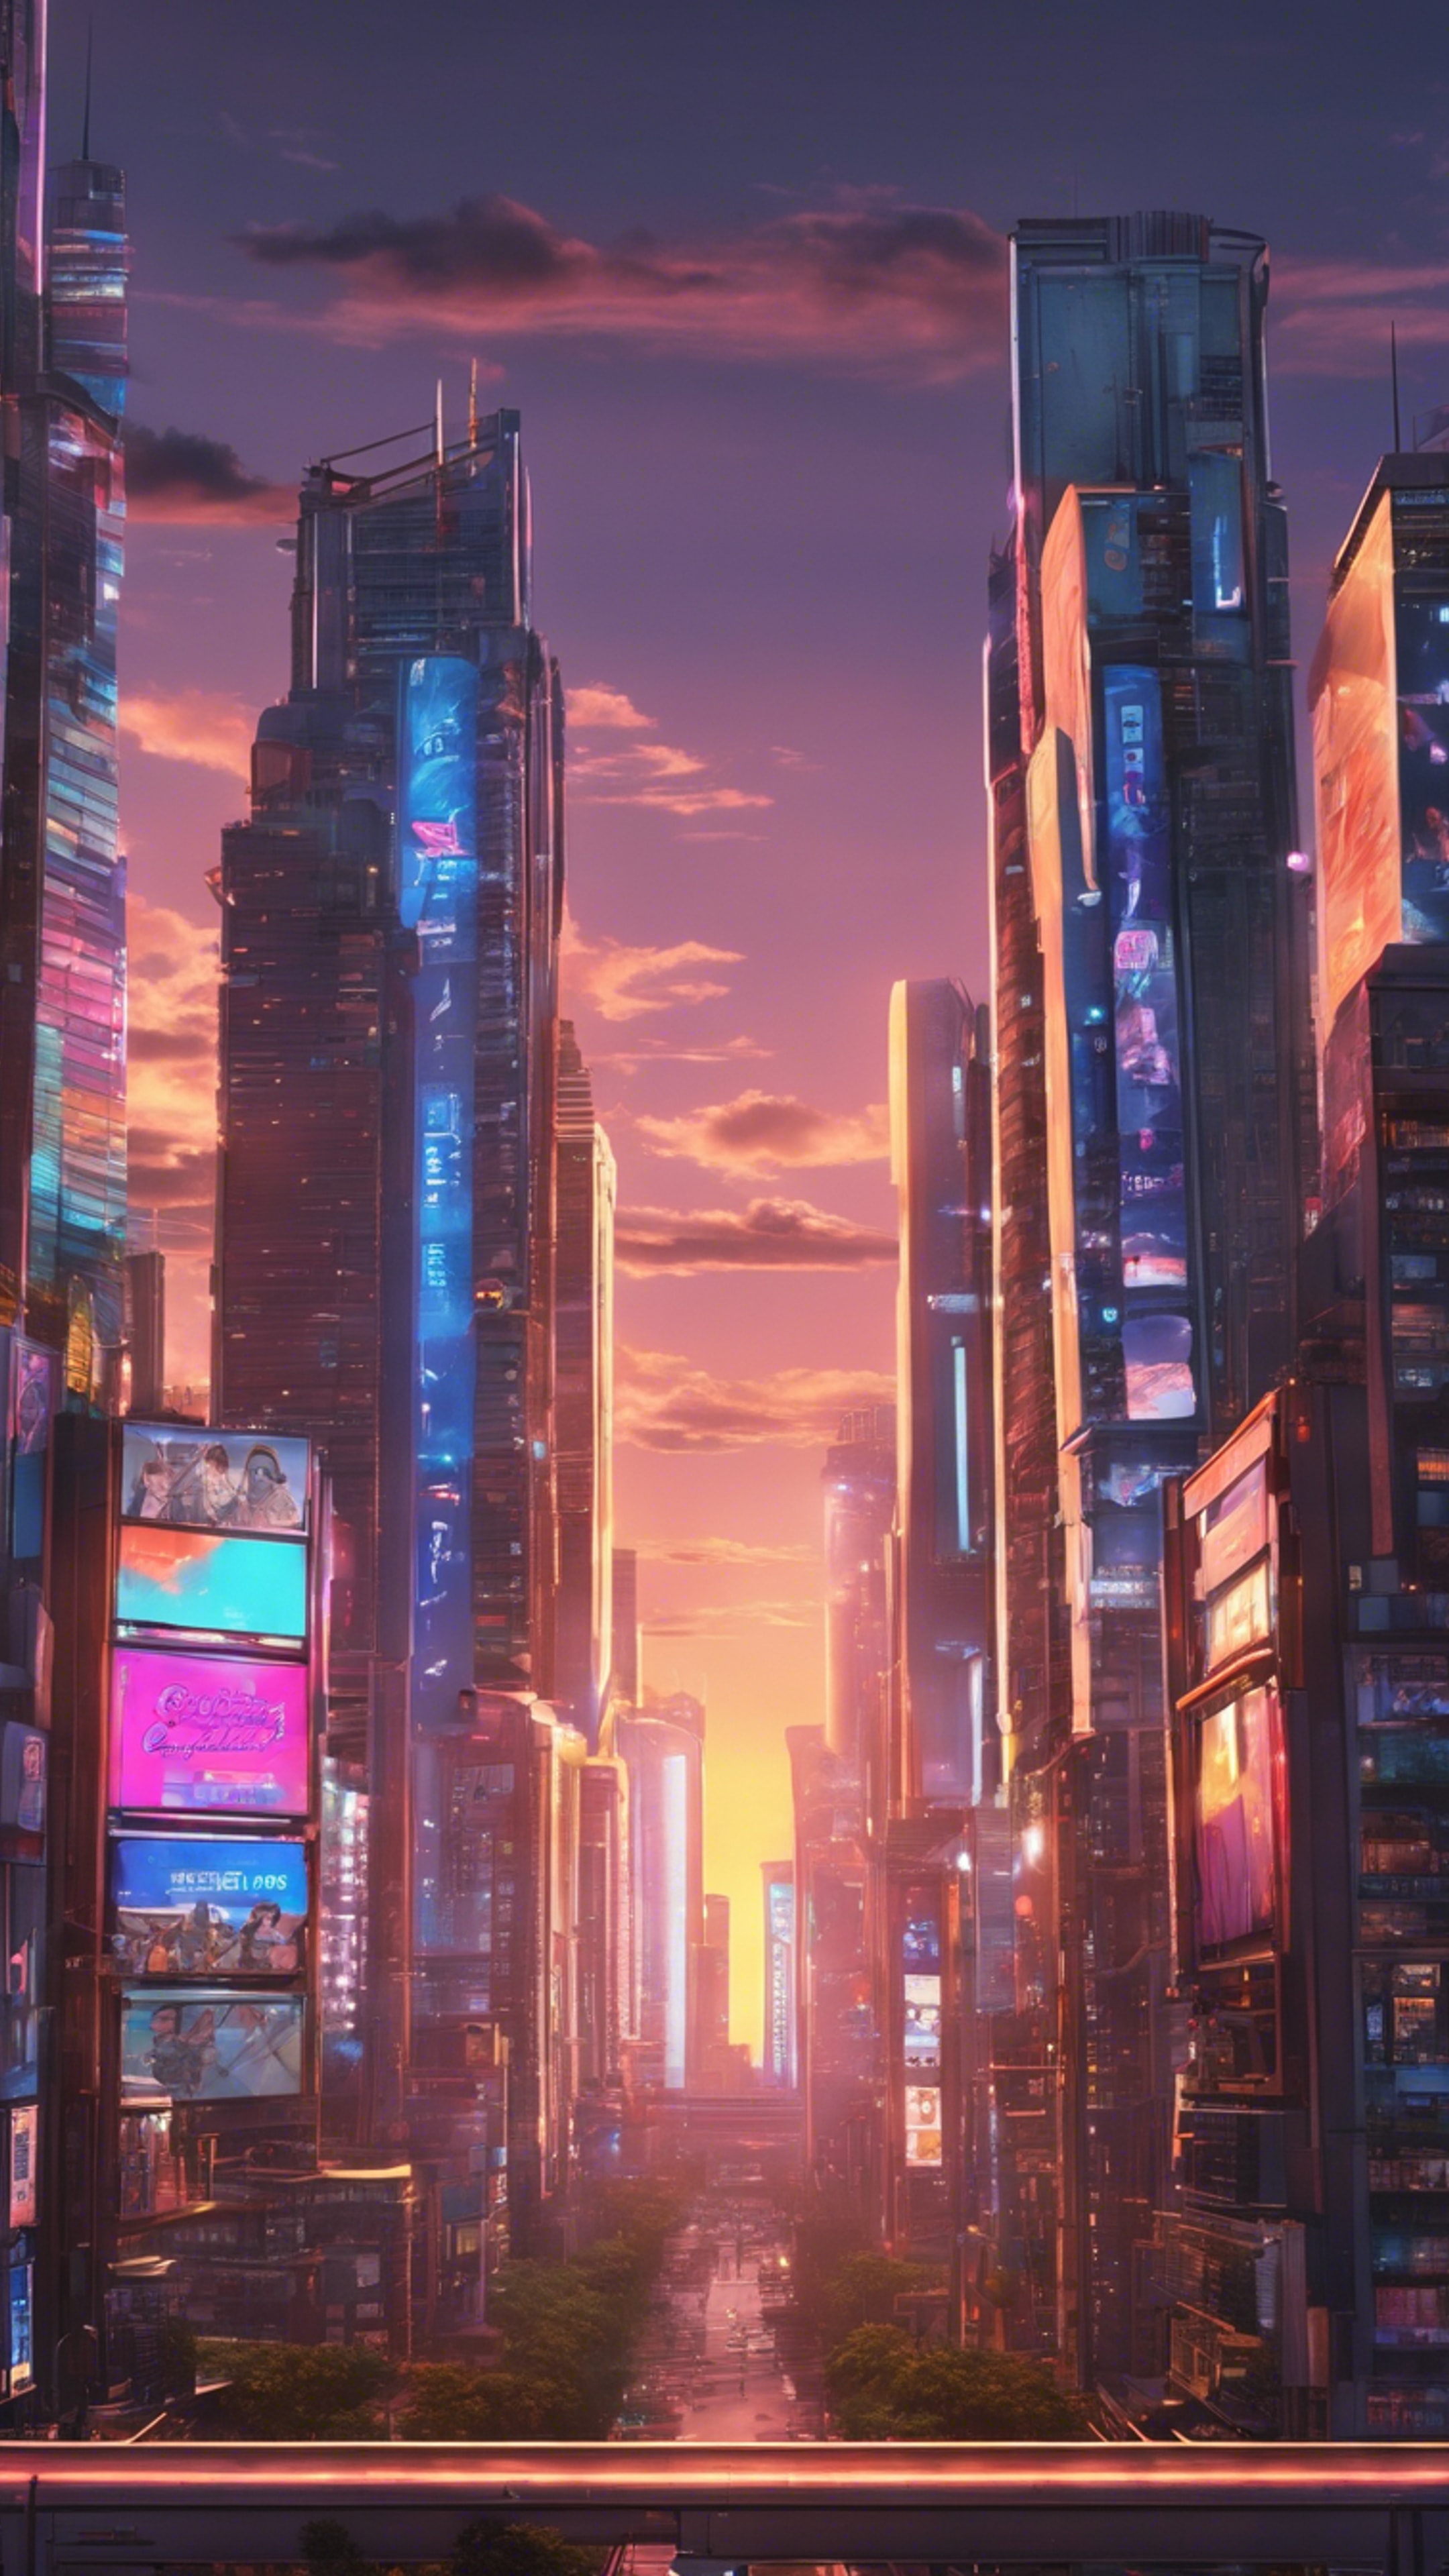 A cool anime-themed cityscape at sunset with towering skyscrapers and glowing neon billboards. duvar kağıdı[63ed83801d984cce89ed]